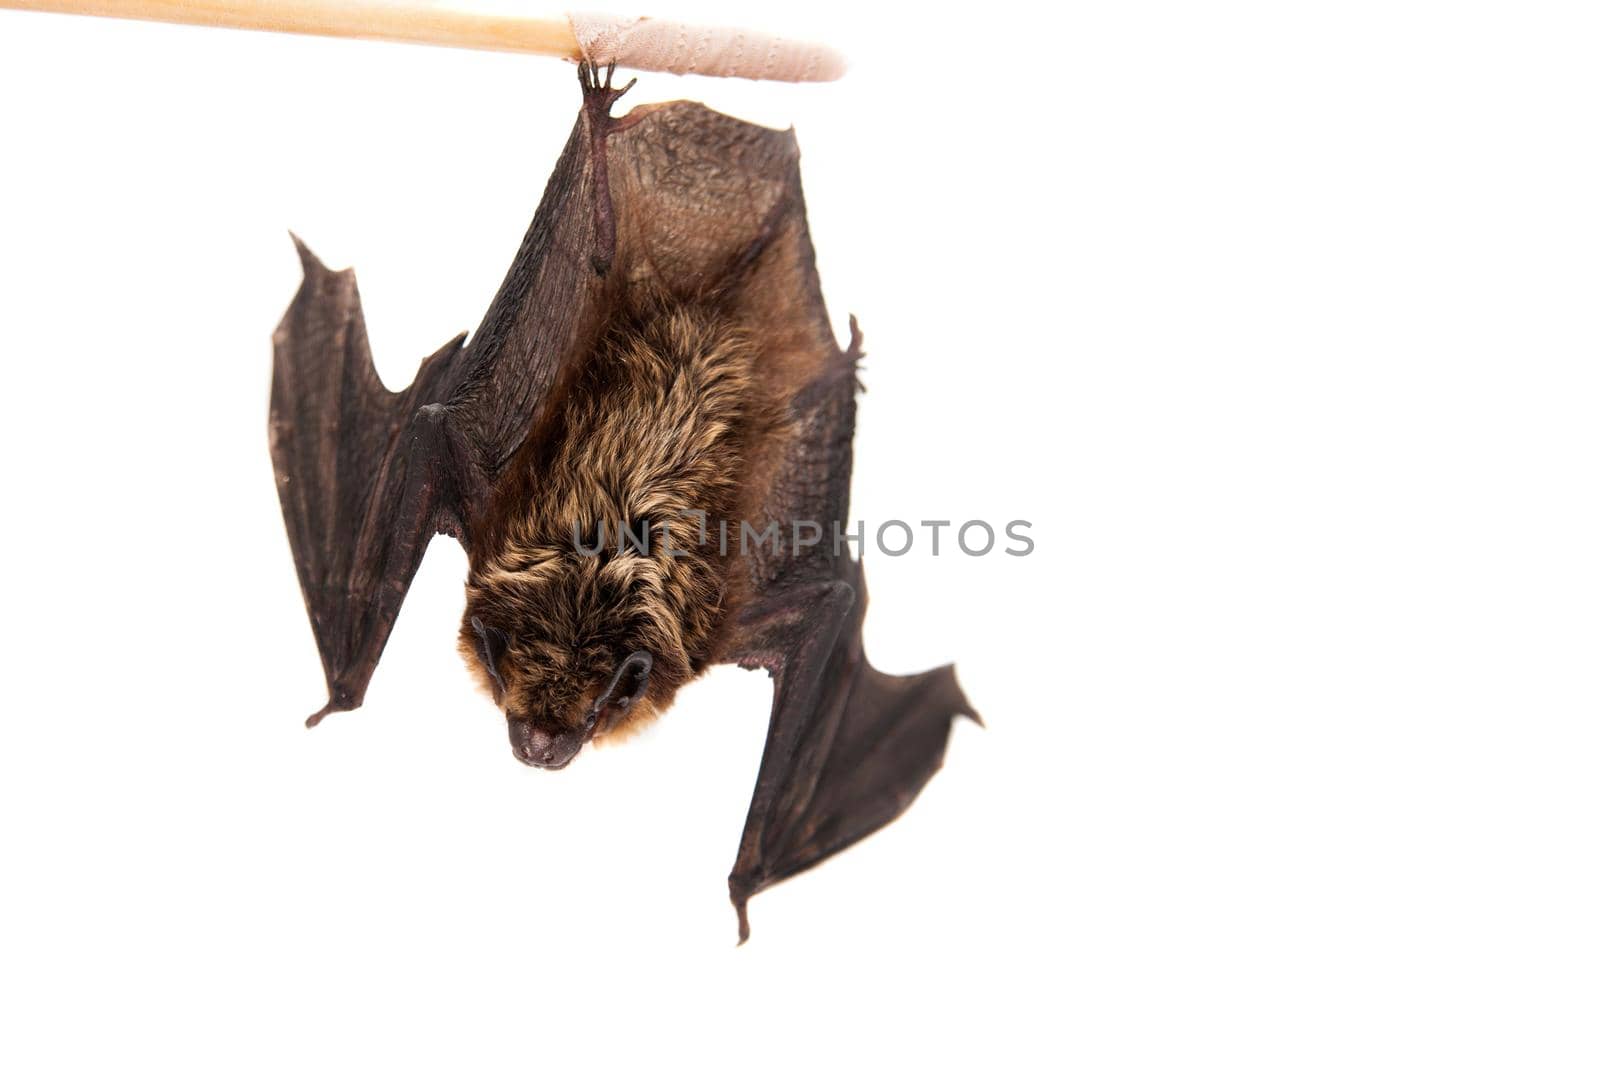 Northern bat on white. by RosaJay